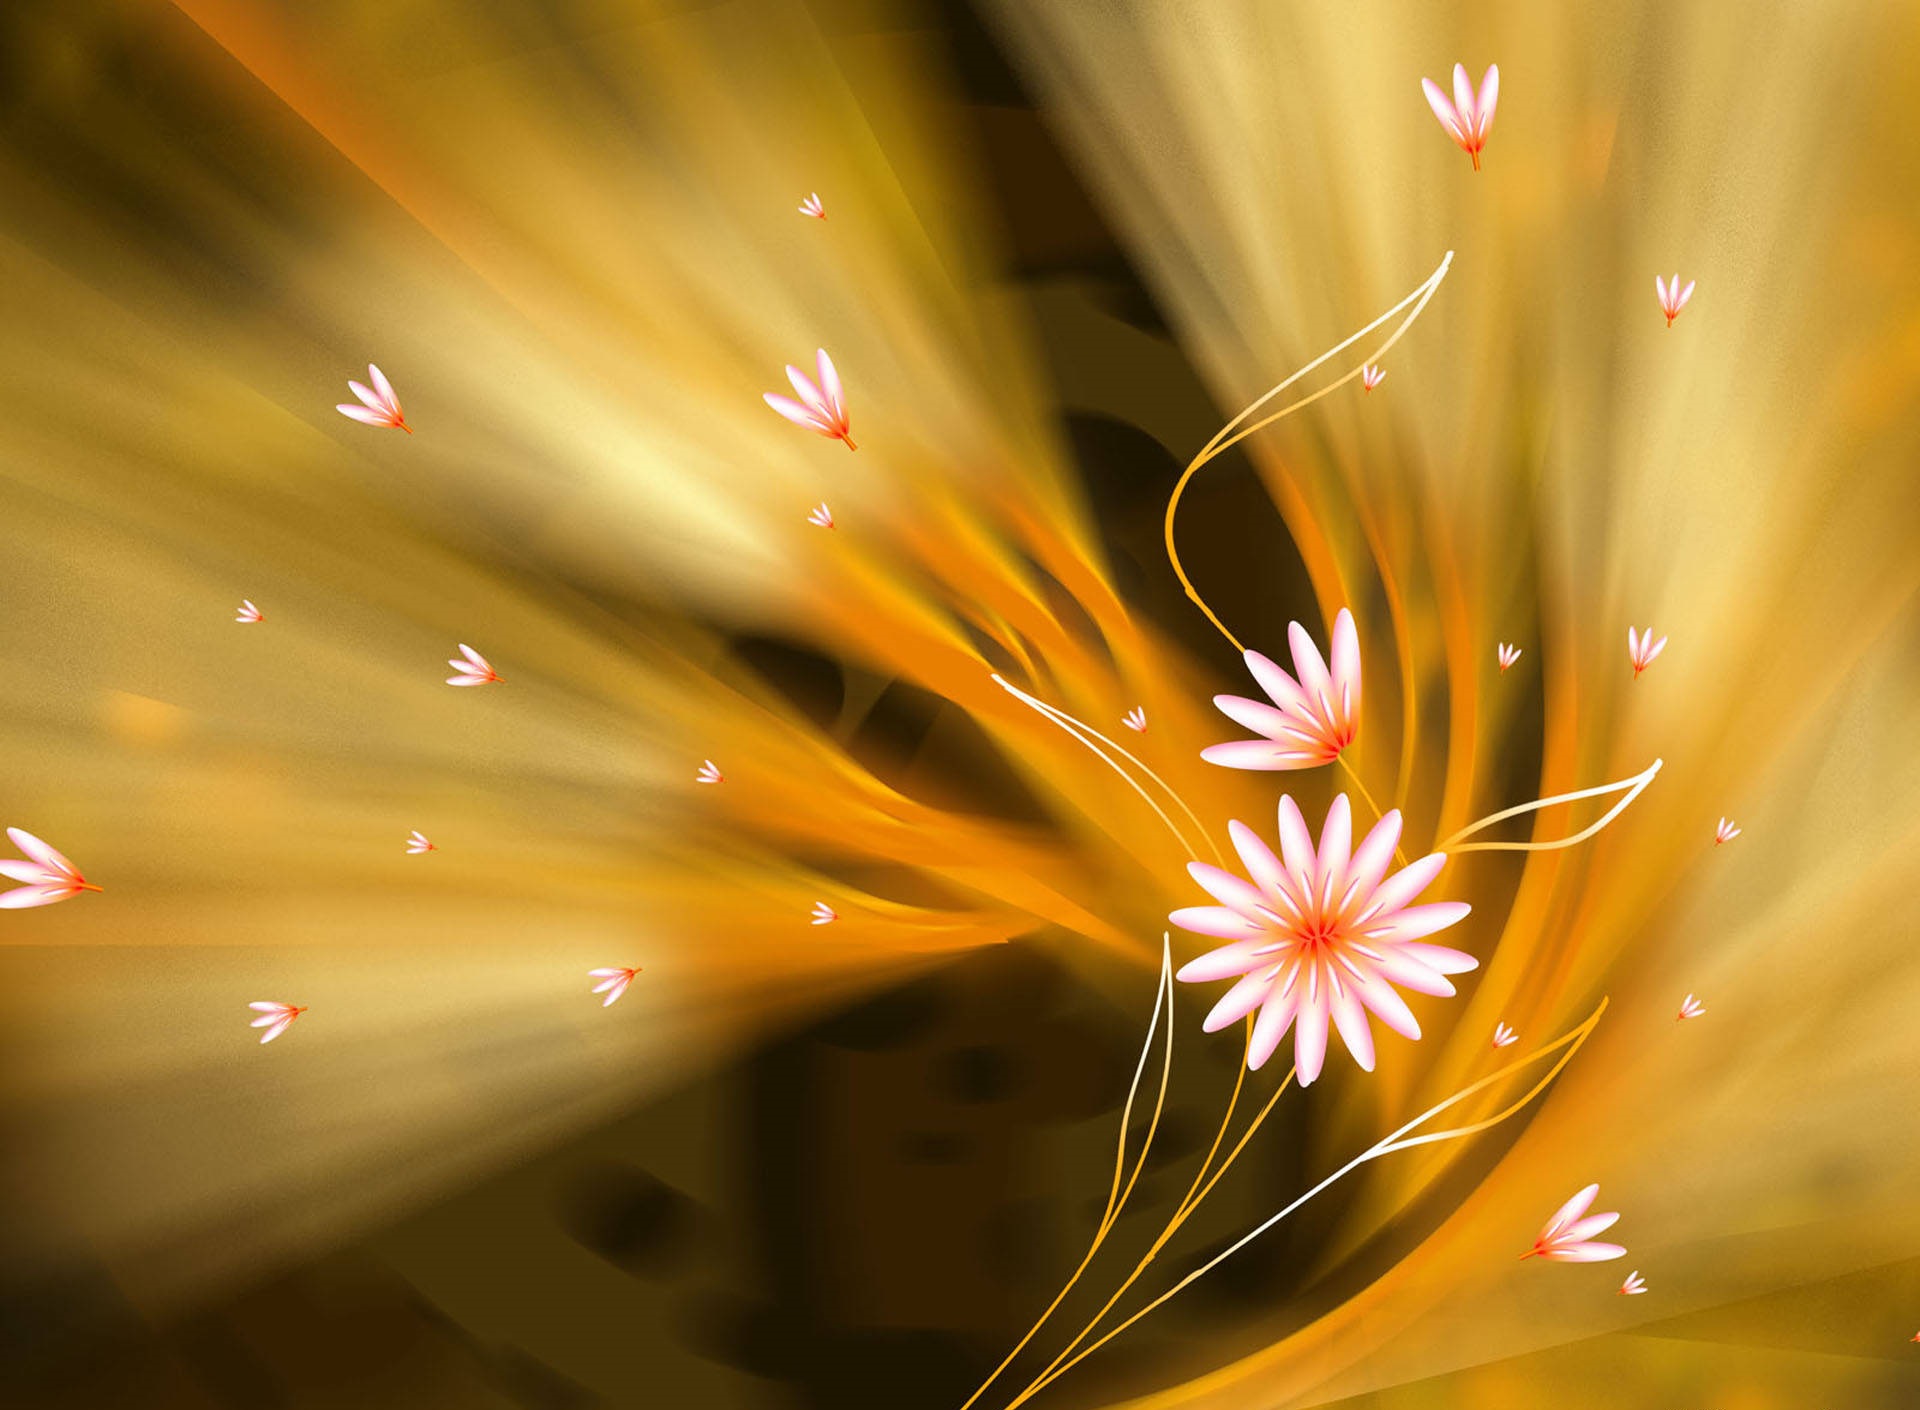 Abstract Flowers Cute Wallpaper Share This On